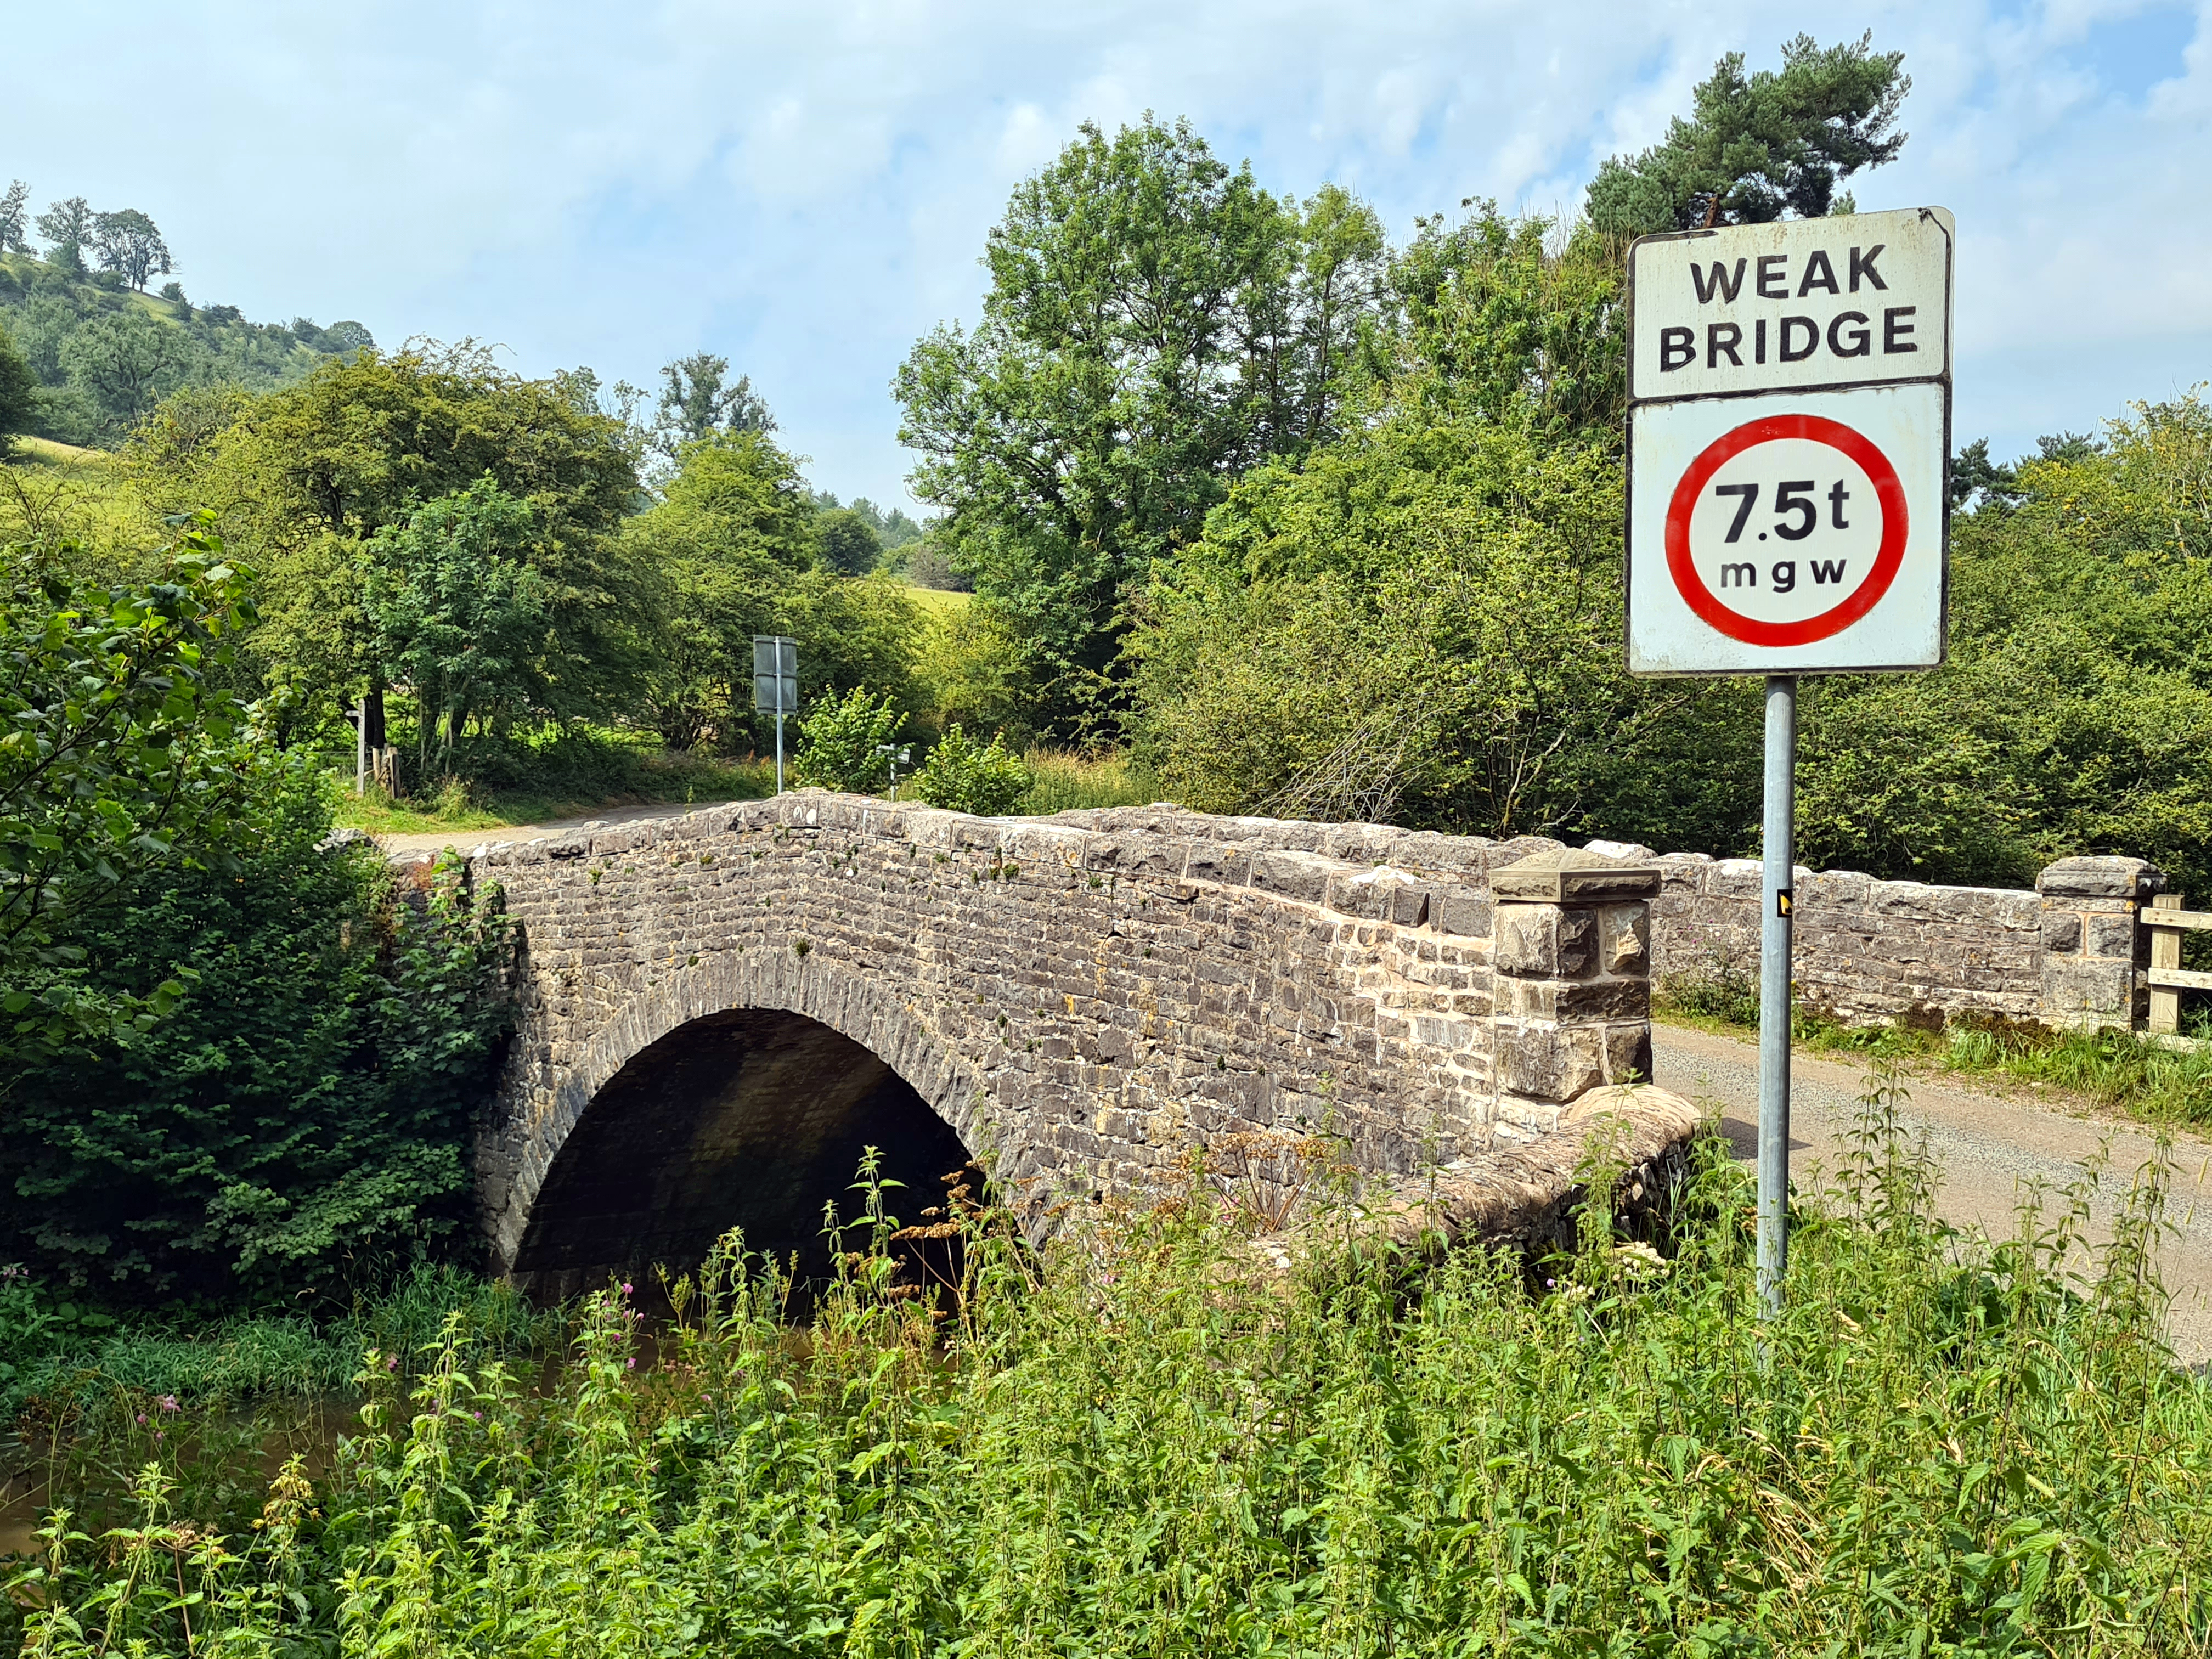 Repetitive rather than single point loading is more accurate in determining the safety of old bridges